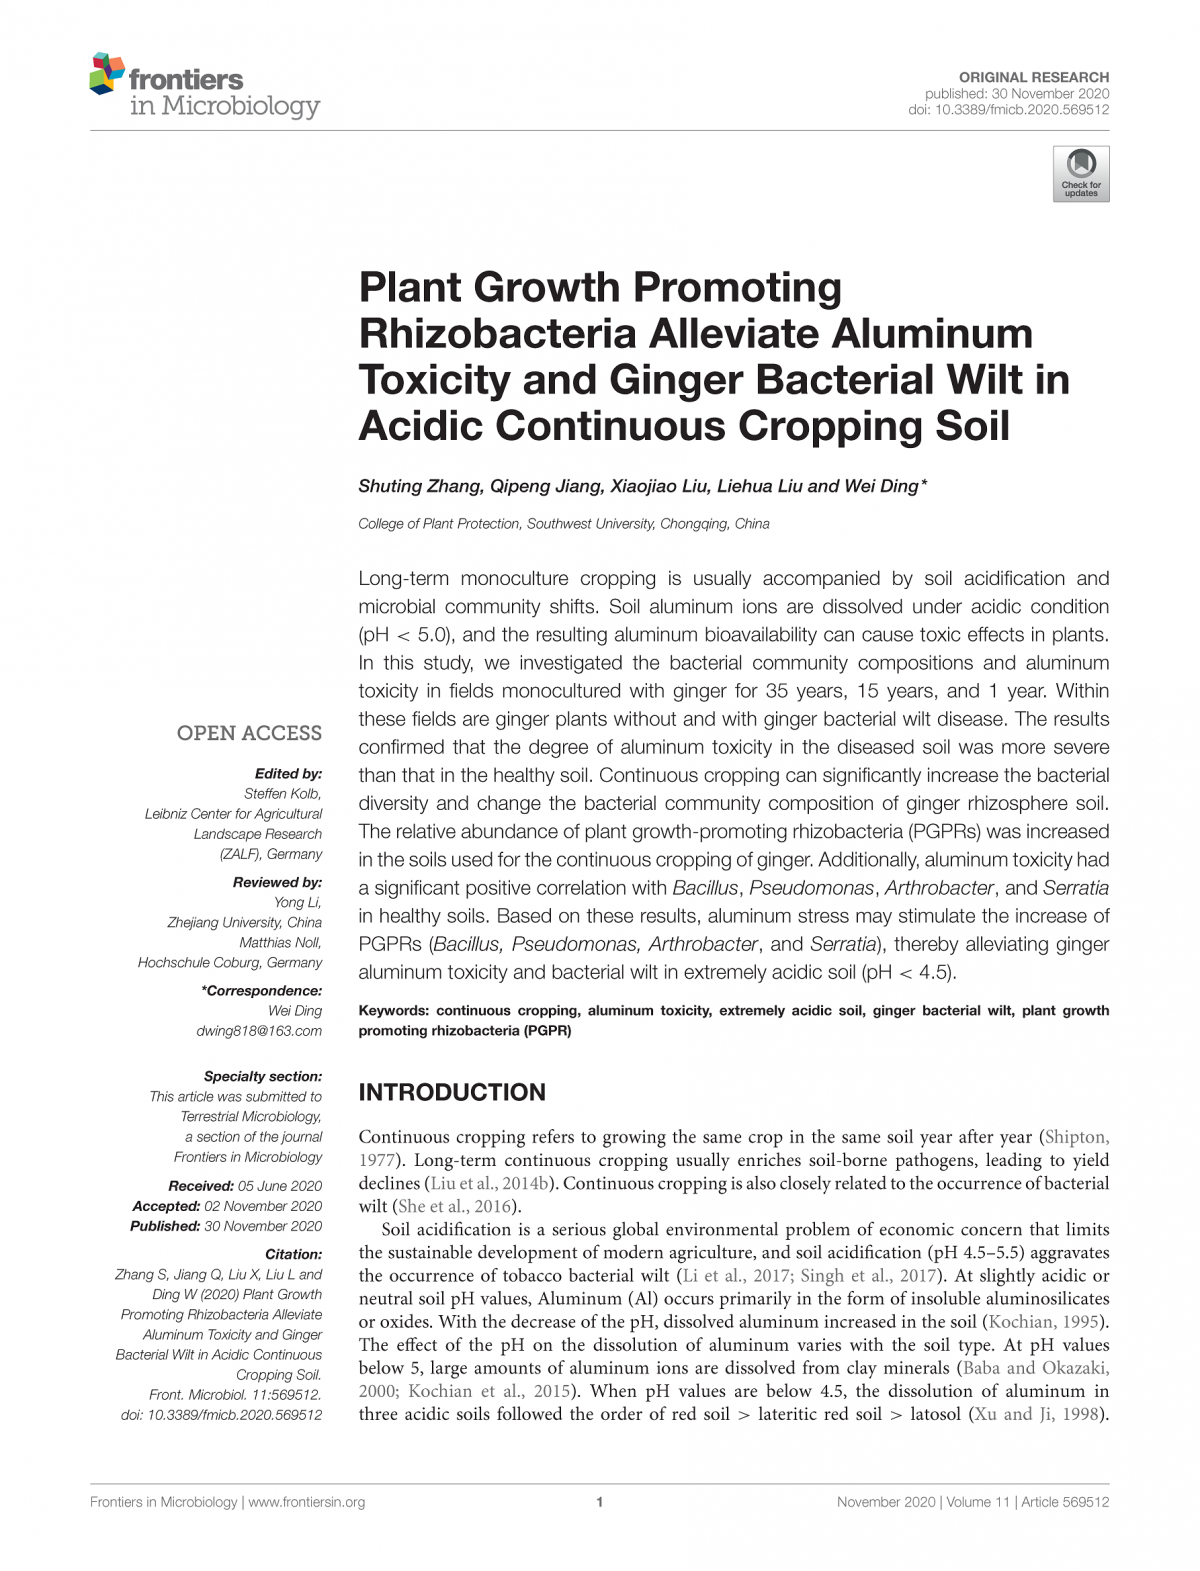 Plant Growth Promoting Rhizobacteria Alleviate Aluminum Toxicity and Ginger Bacterial Wilt in Acidic_页面_1.png